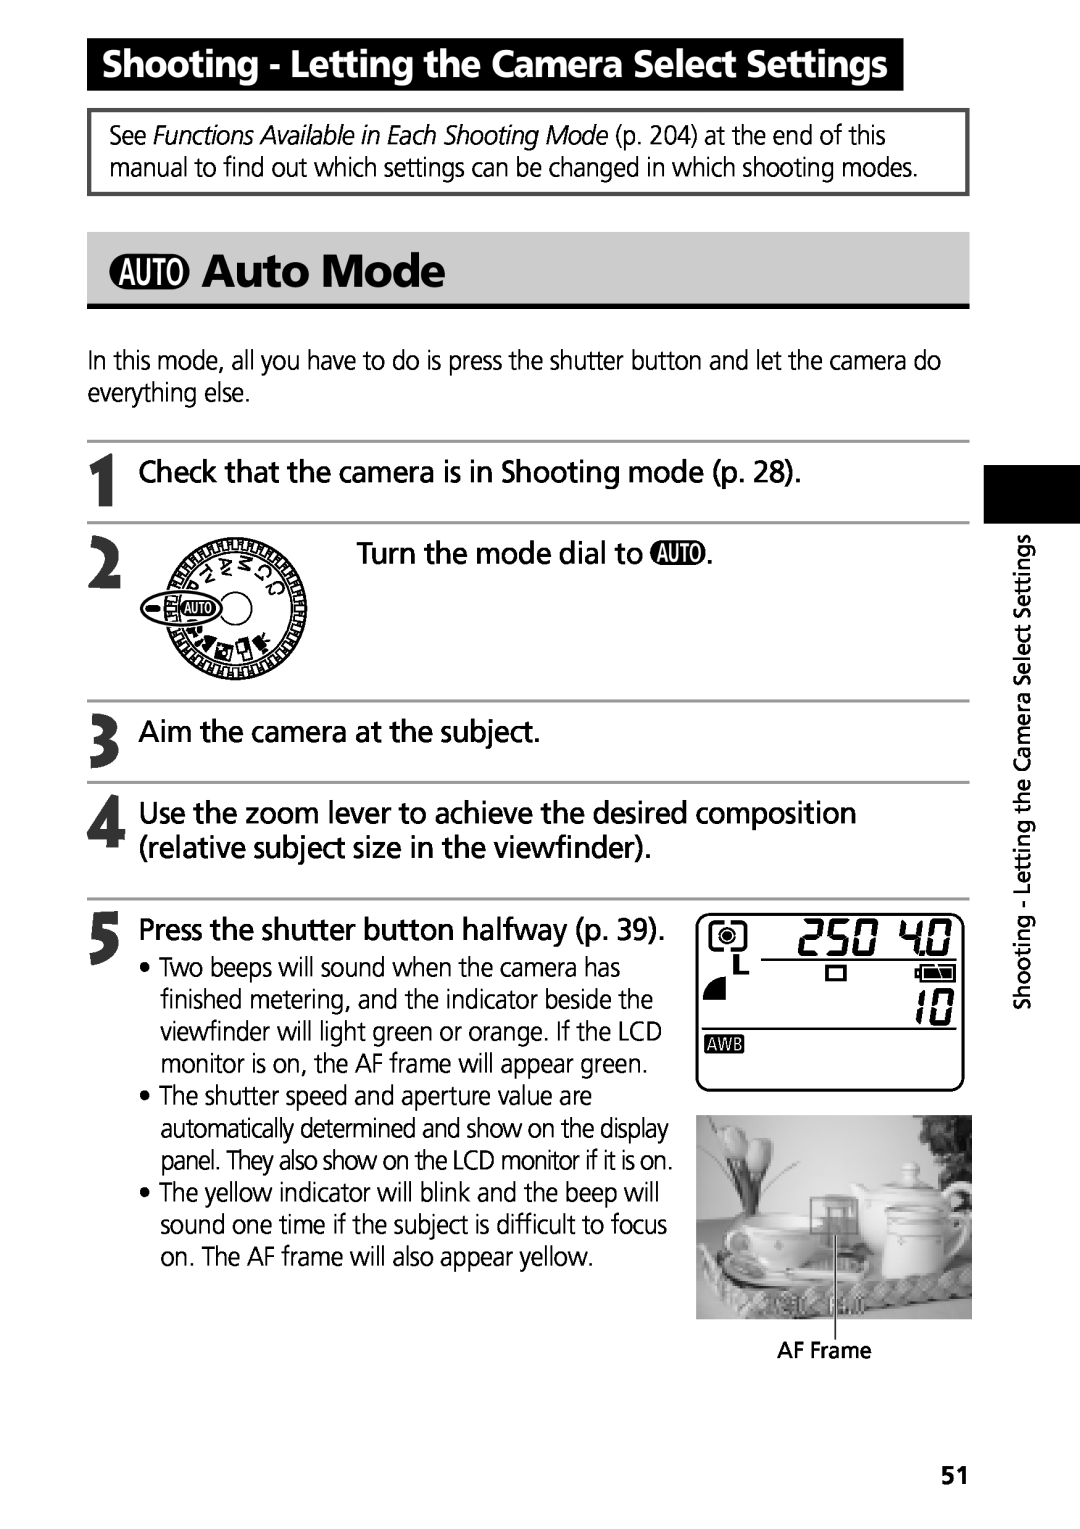 Canon G3 manual Auto Mode, Shooting - Letting the Camera Select Settings, Check that the camera is in Shooting mode p 